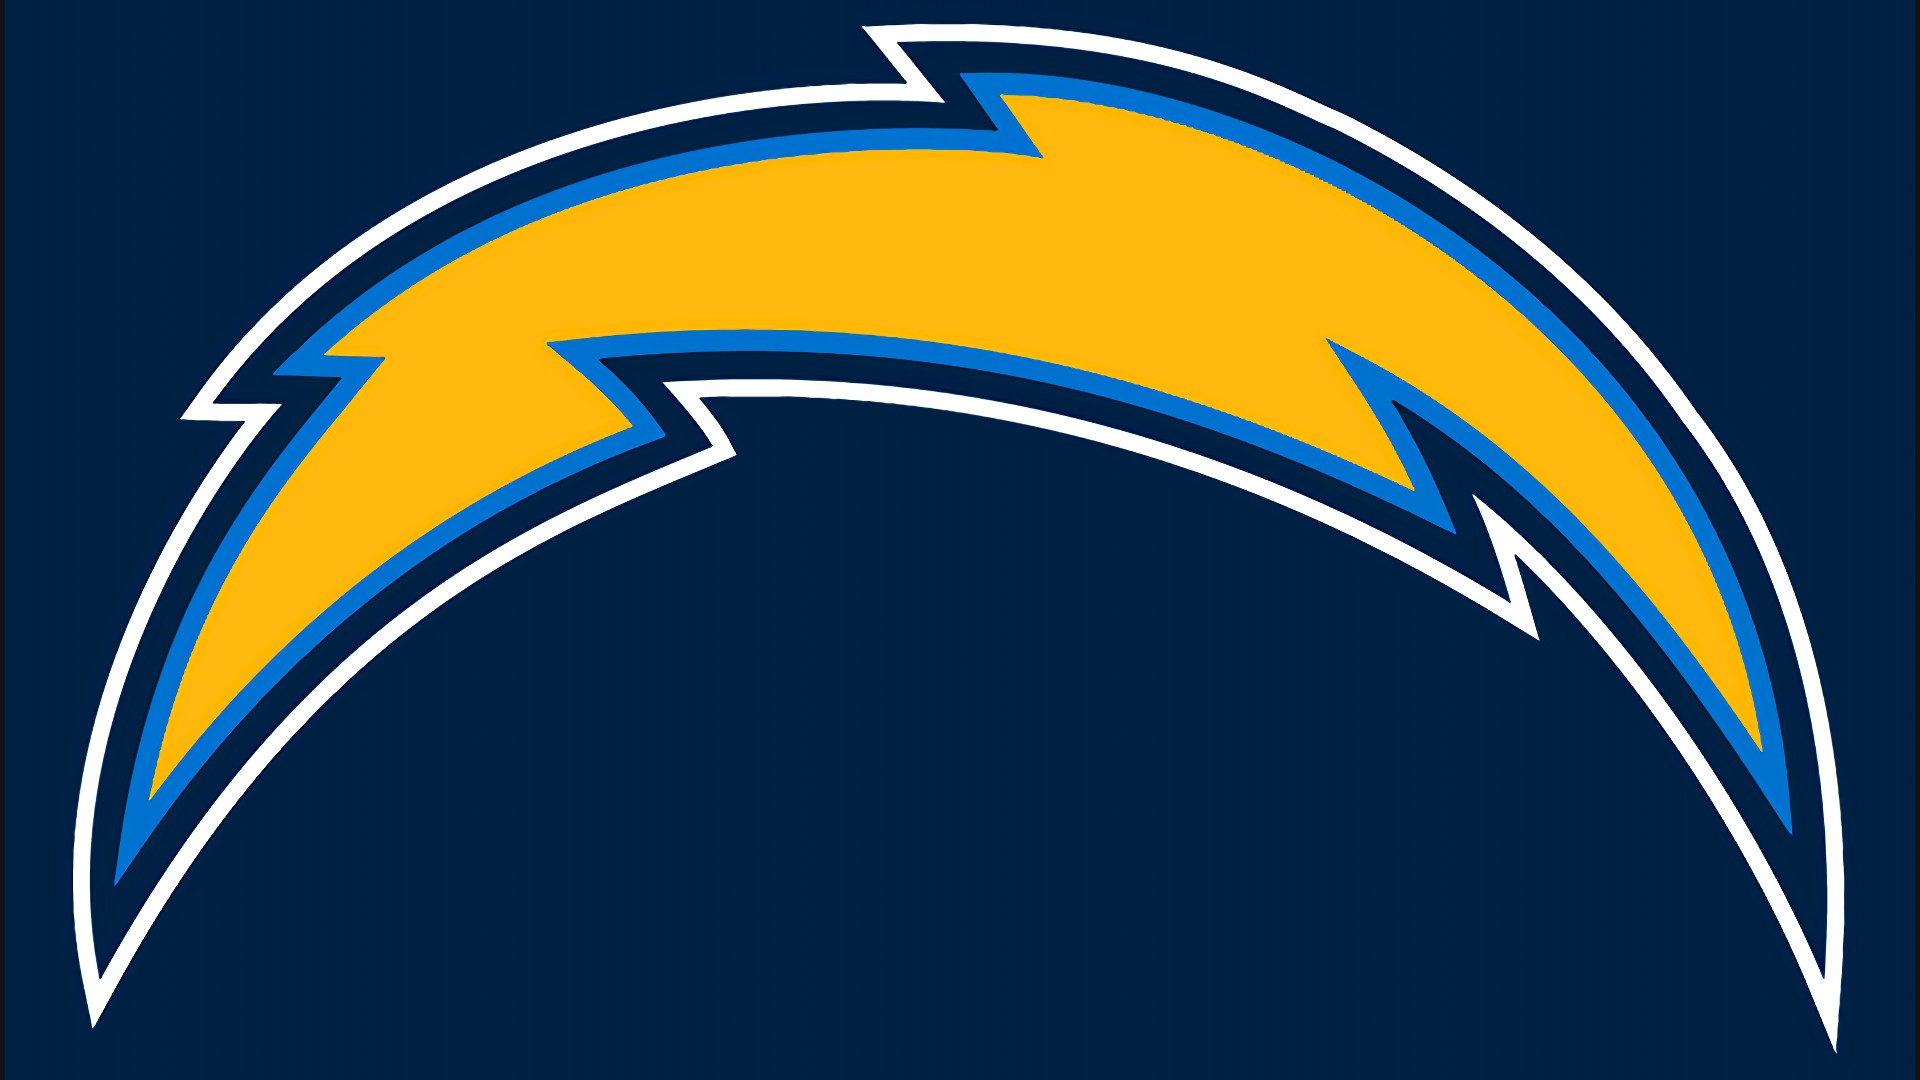 Los Angeles Chargers Wallpaper For Mac Backgrounds with resolution 1920x1080 pixel. You can make this wallpaper for your Mac or Windows Desktop Background, iPhone, Android or Tablet and another Smartphone device